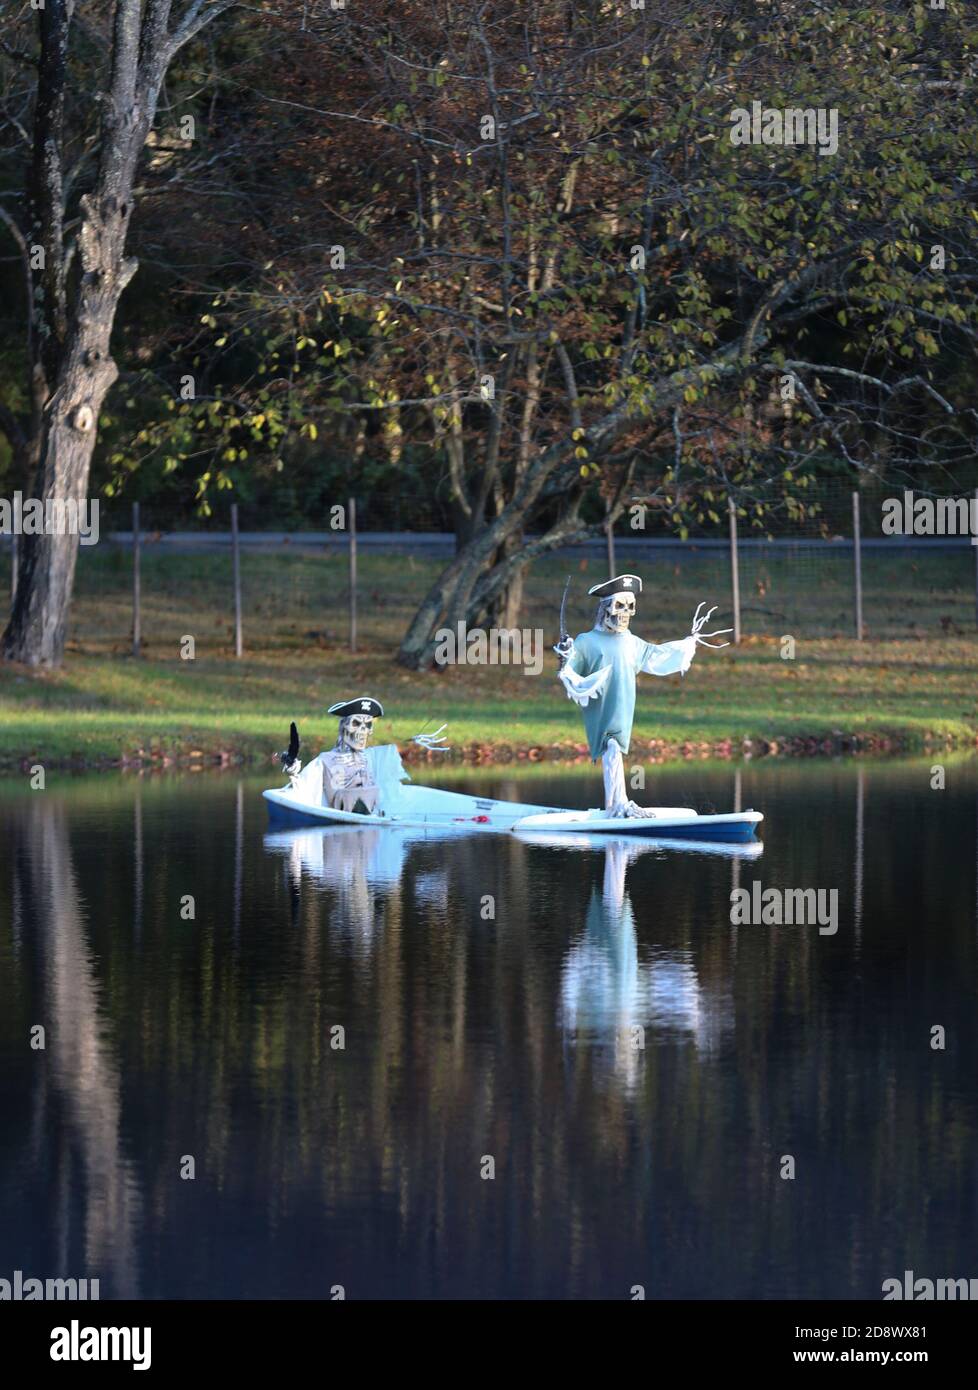 Pirate figures in a pond at Halloween time Stock Photo